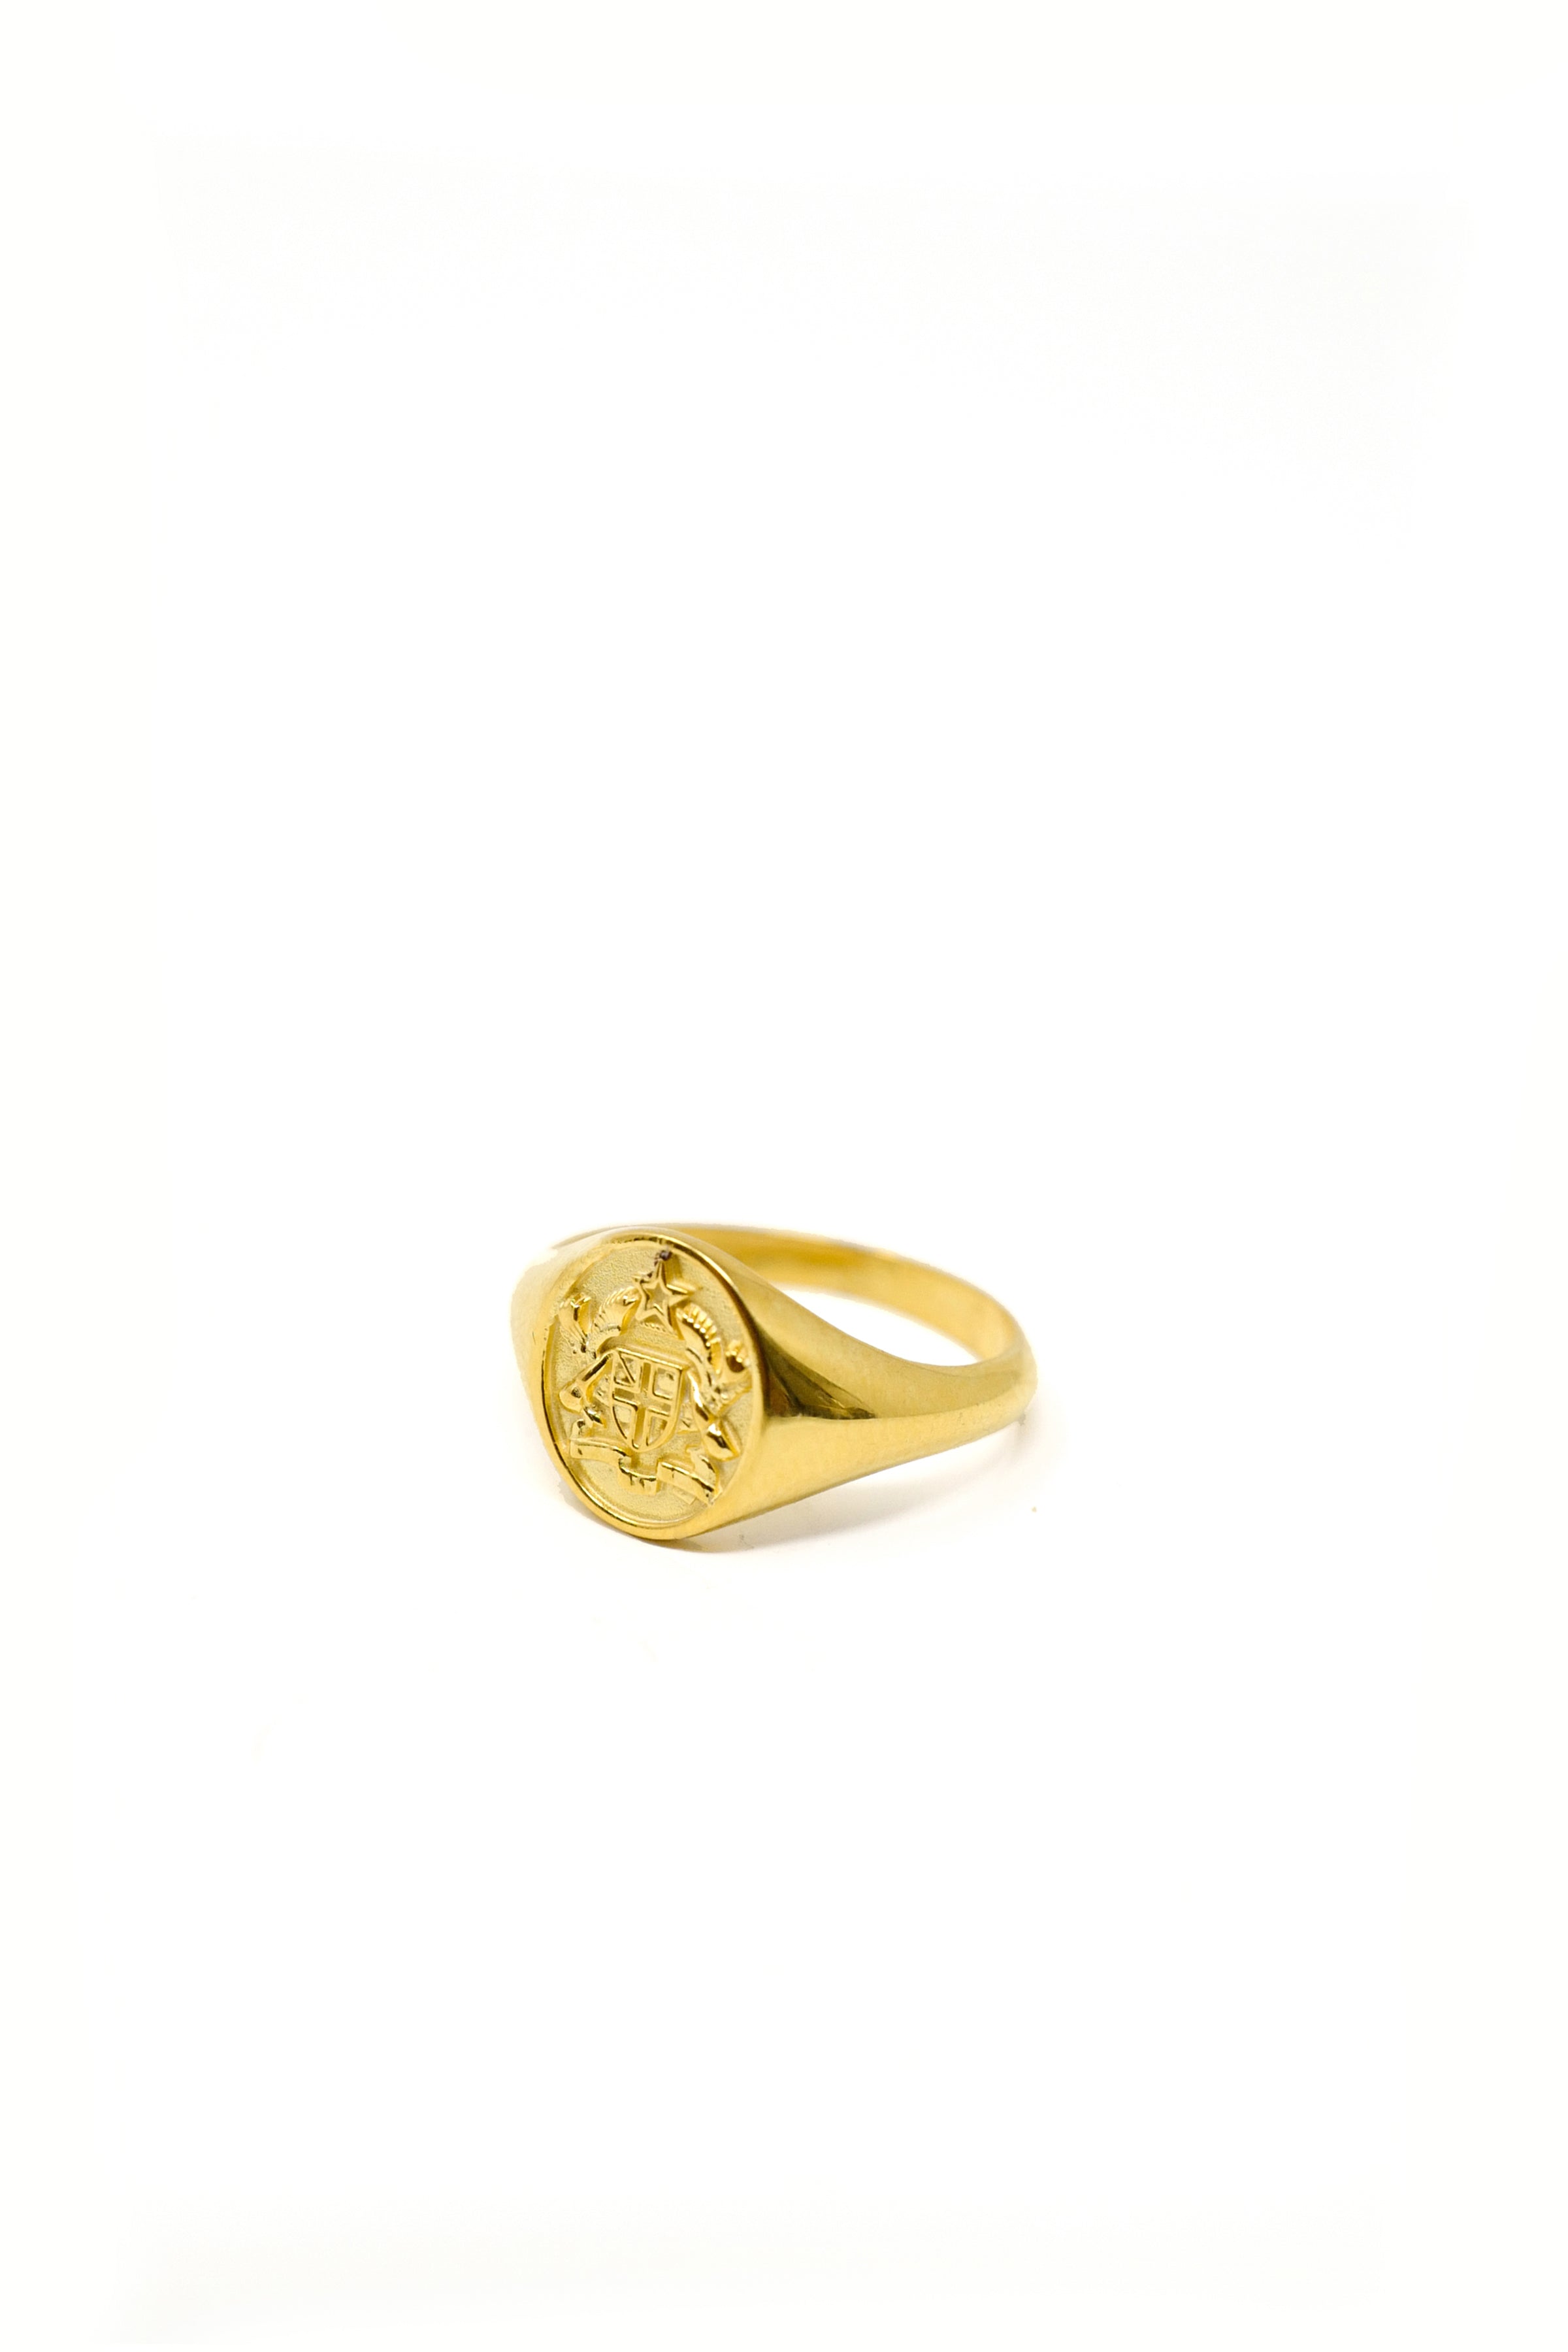 THE GHANA Crest Signet Ring III – omiwoods